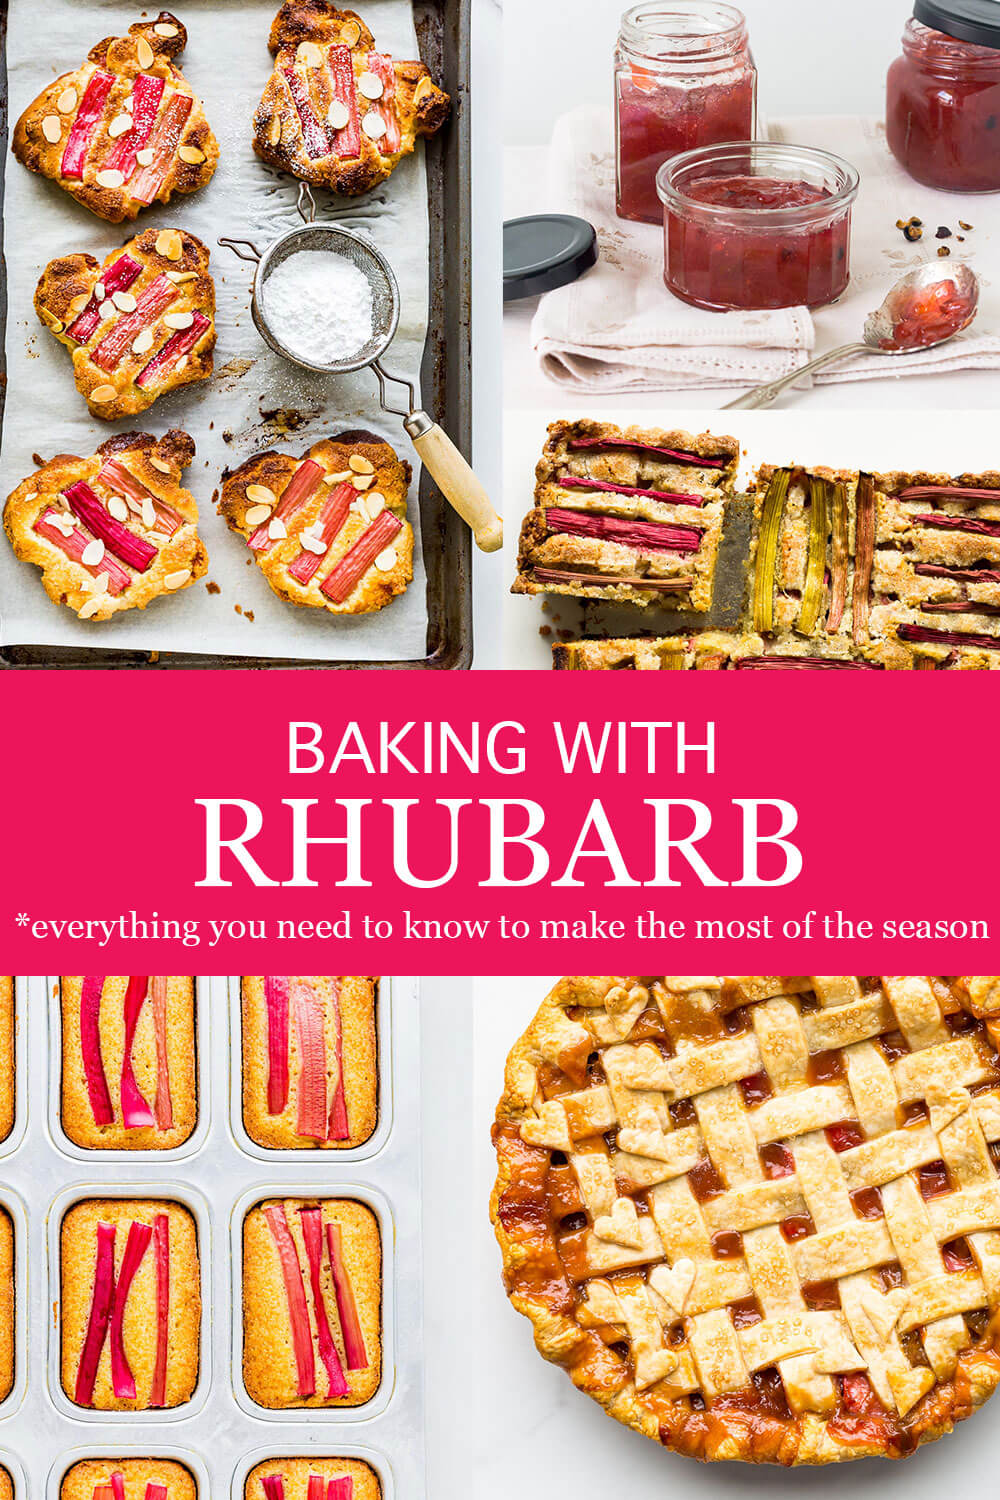 Baking with rhubarb and everything you need to know to make the most of the season featuring rhubarb pie, orange cake with rhubarb, rhubarb jam, rhubarb cake, and bostock